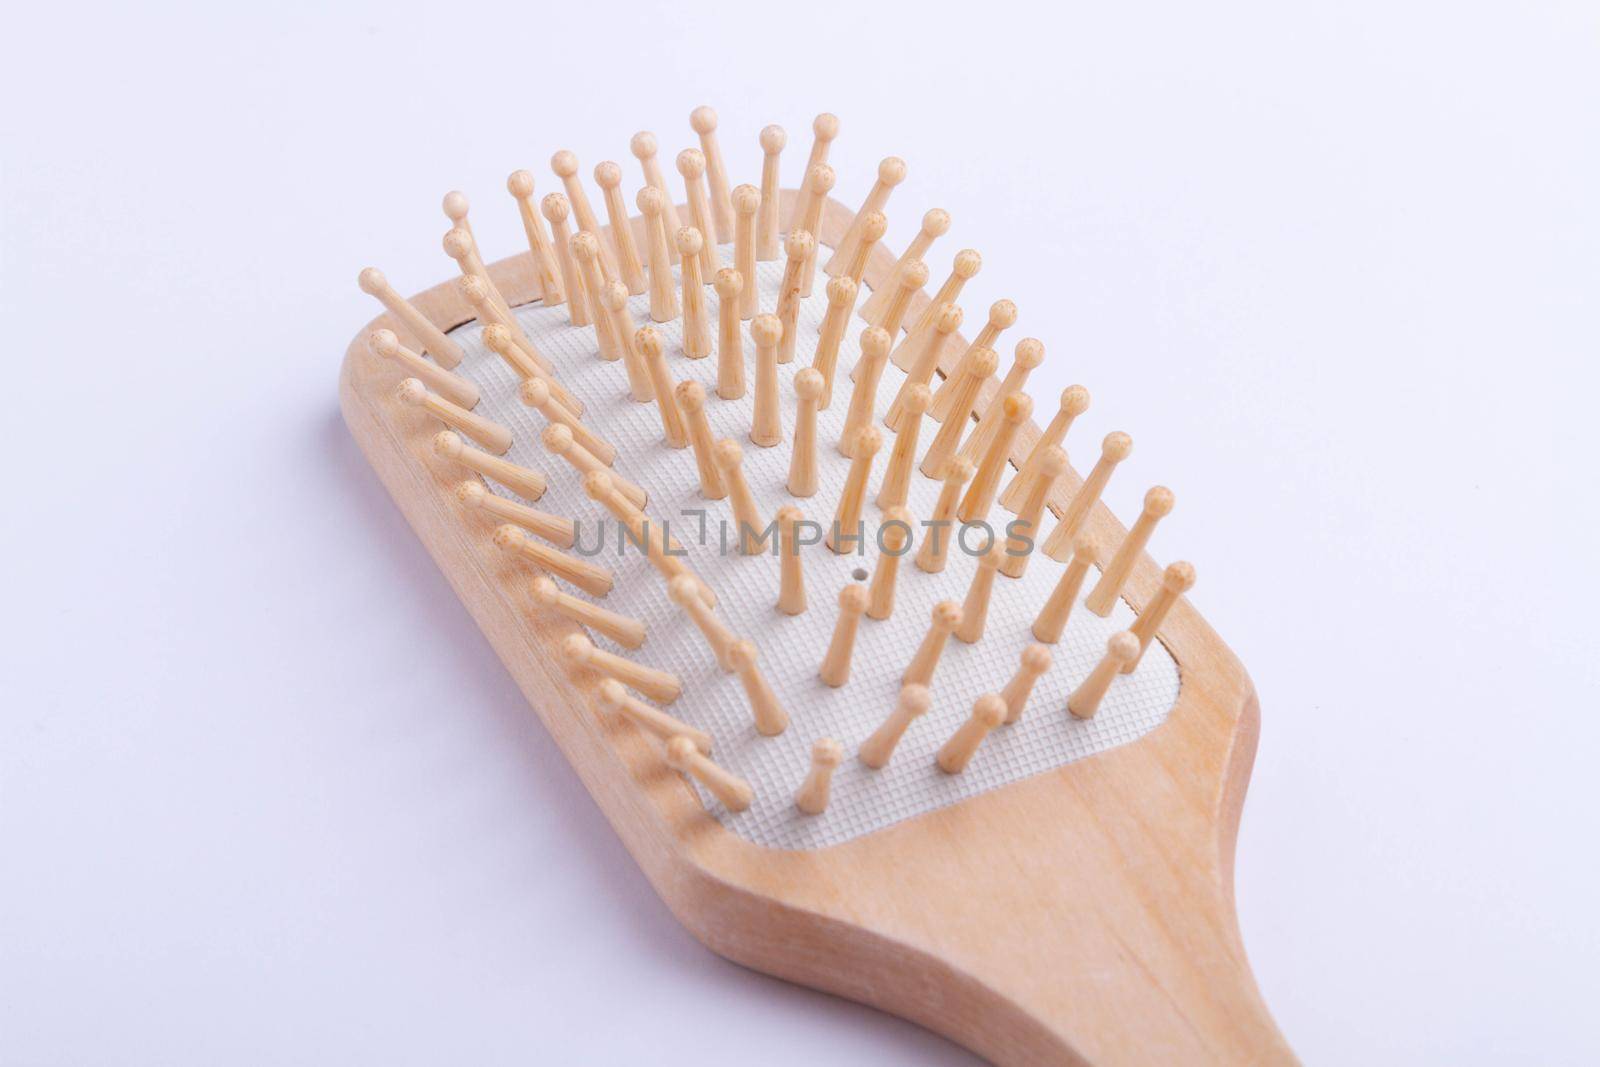 Massage comb to stimulate hair growth. Comb on isolated background. by Verrone